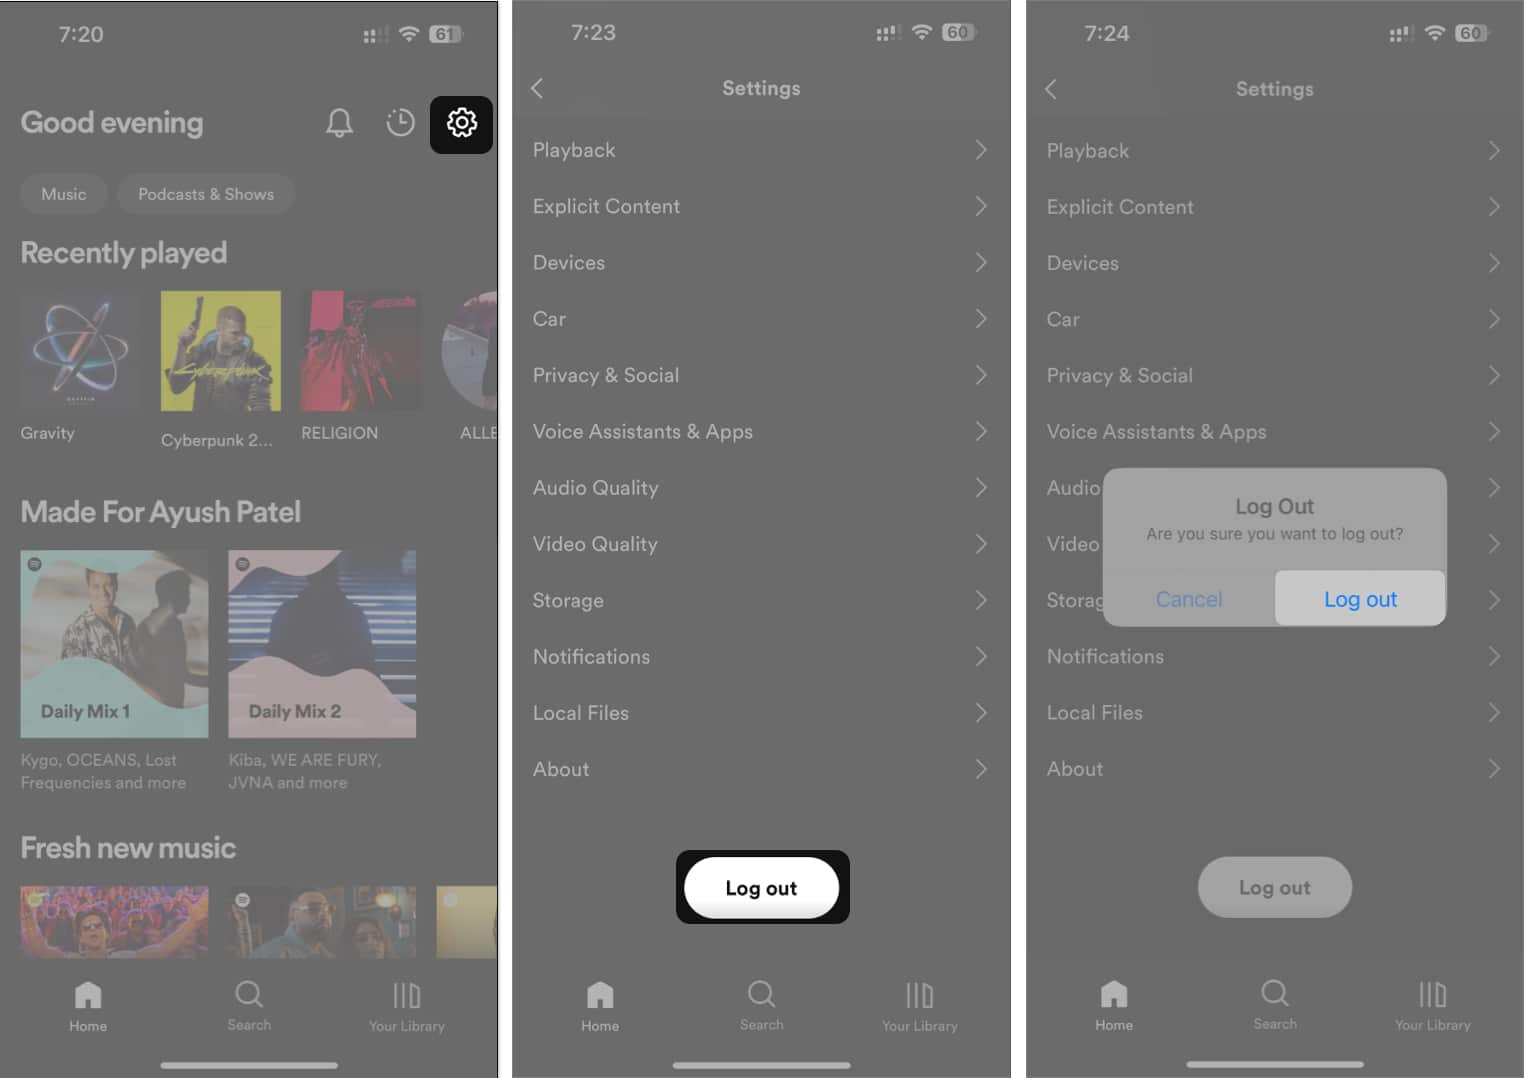 Log out from Spotify on iPhone